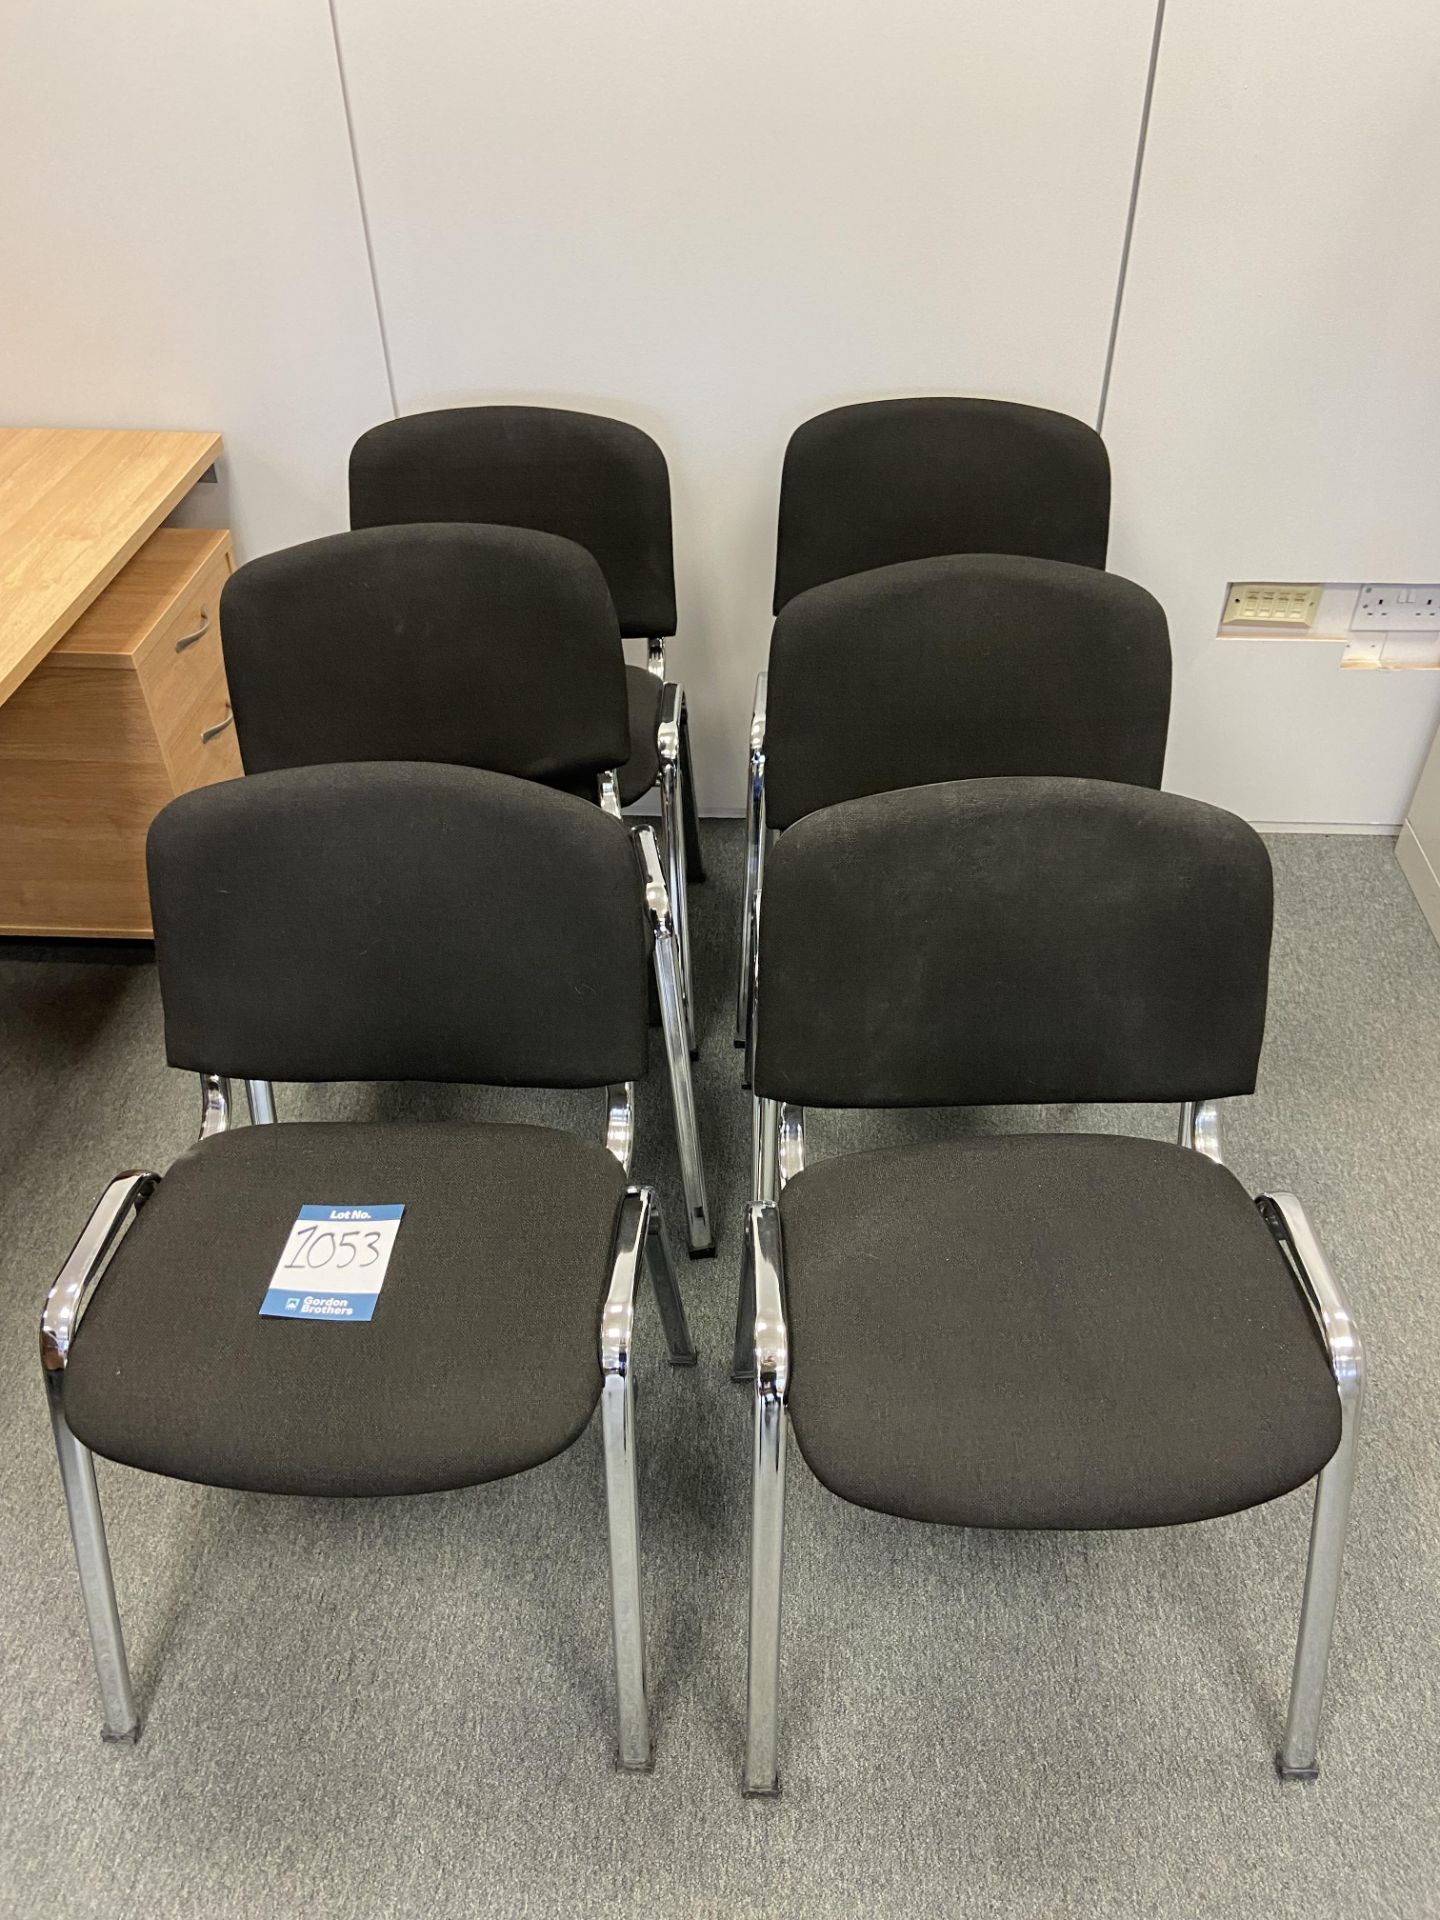 Lot comprisng: six meeting room chairs